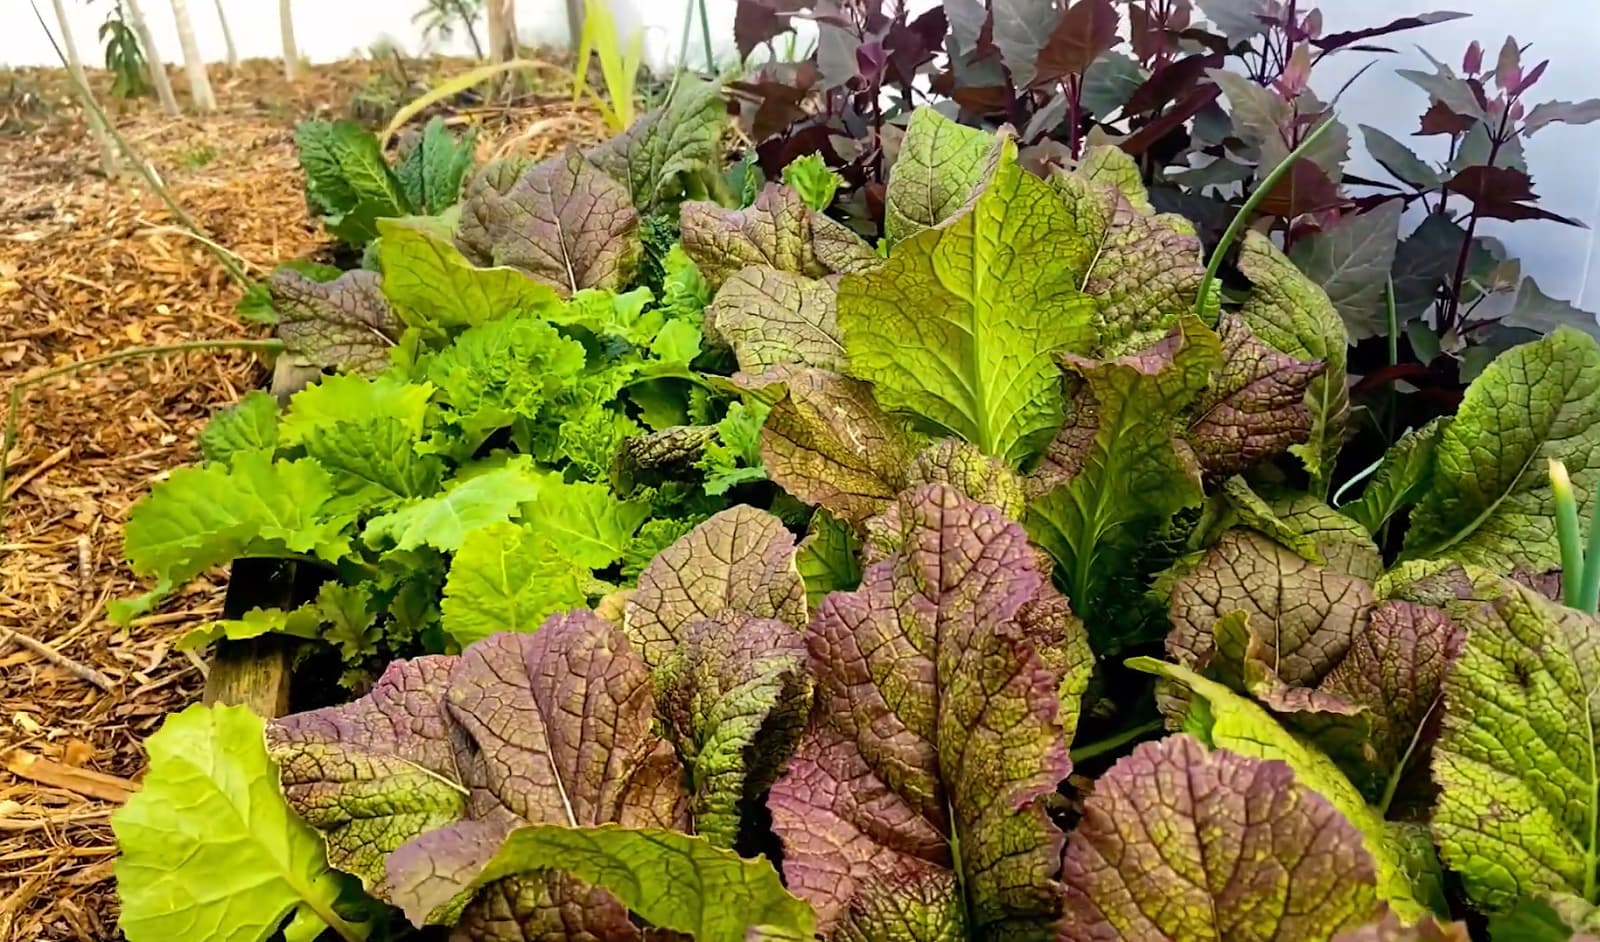 Garden bed with mixed green and purple leafy vegetables.